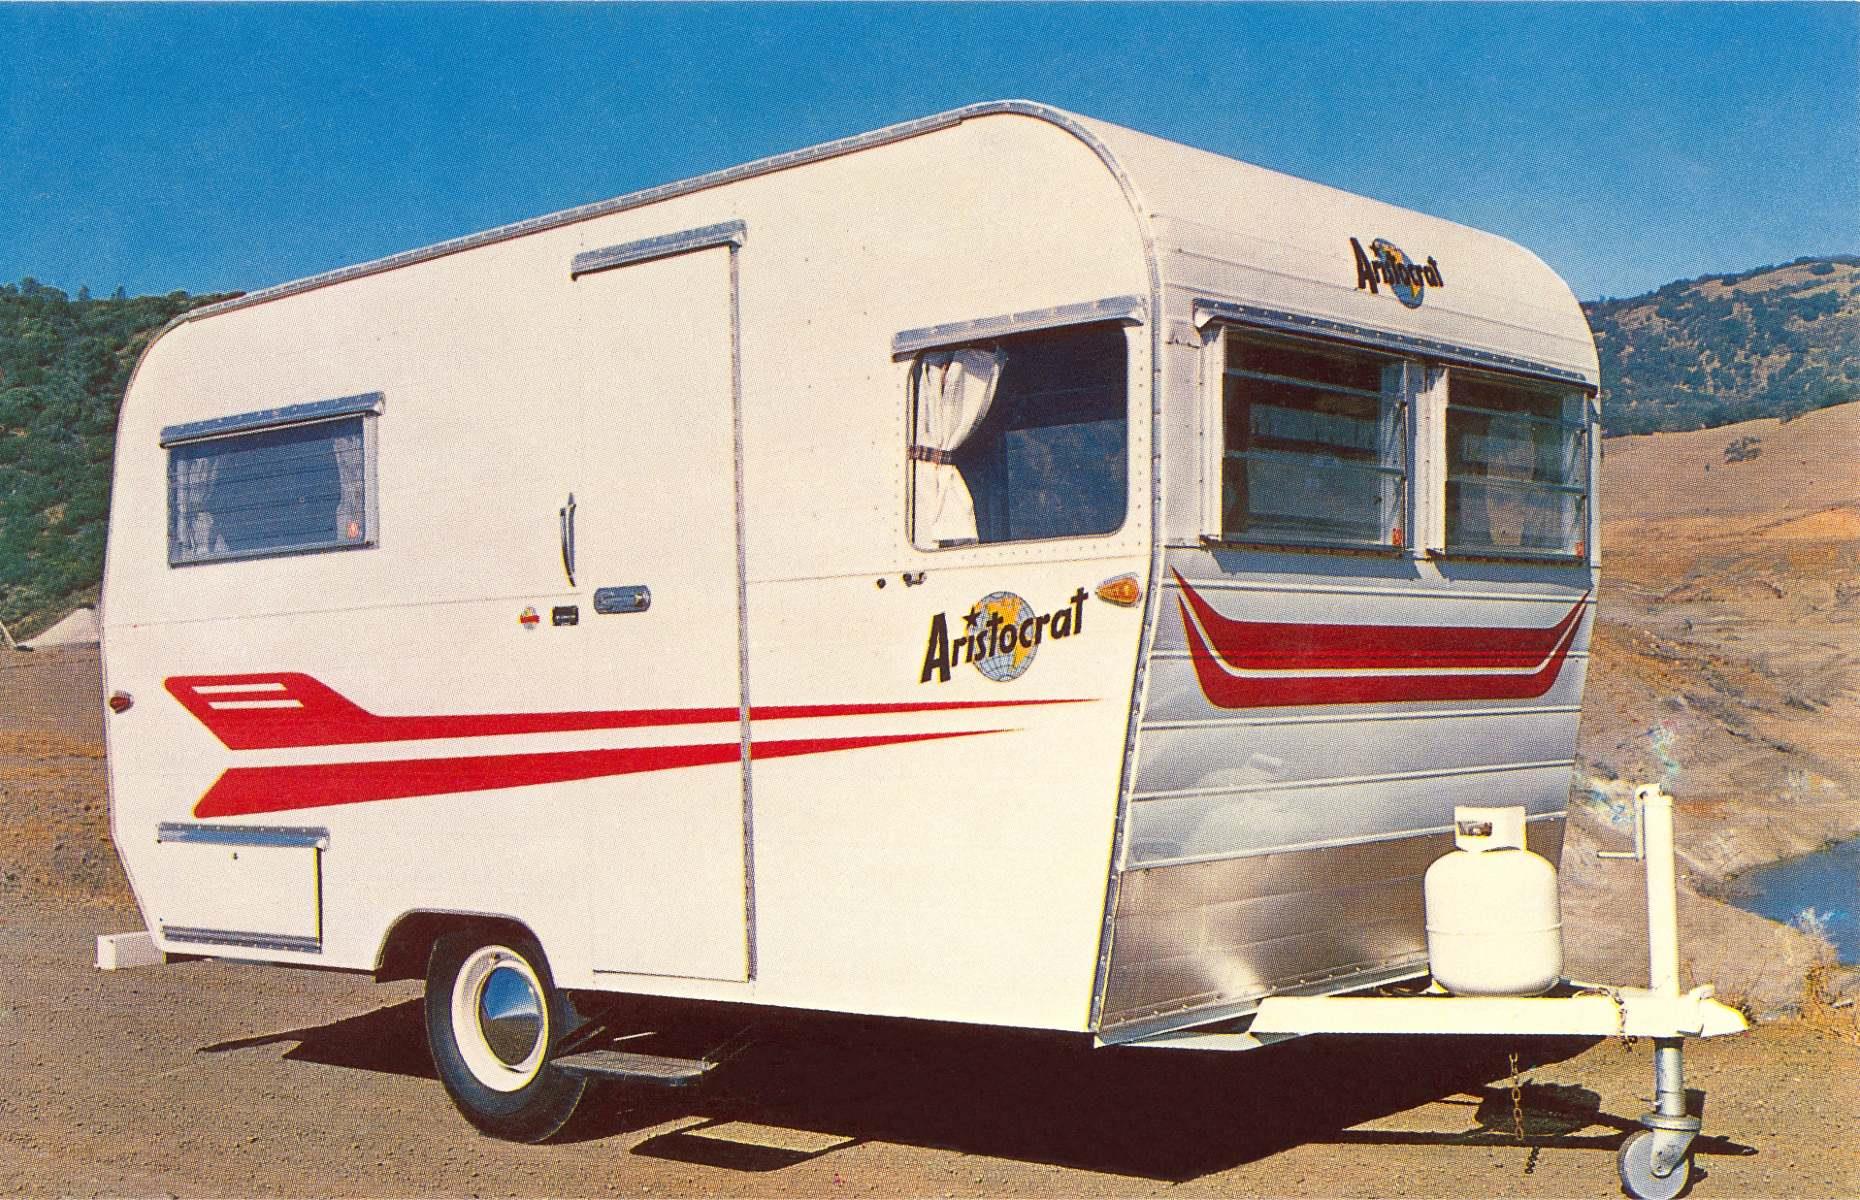 In the early 1960s, Aristocrat was the premier manufacturer of RVs in the country and its lo-liner model, which could fit into a standard garage, was especially popular. Although the company was in business for less than two decades, its trailers were so well-made – using aircraft construction methods and high-quality metals – they can still sometimes be seen on the road today.